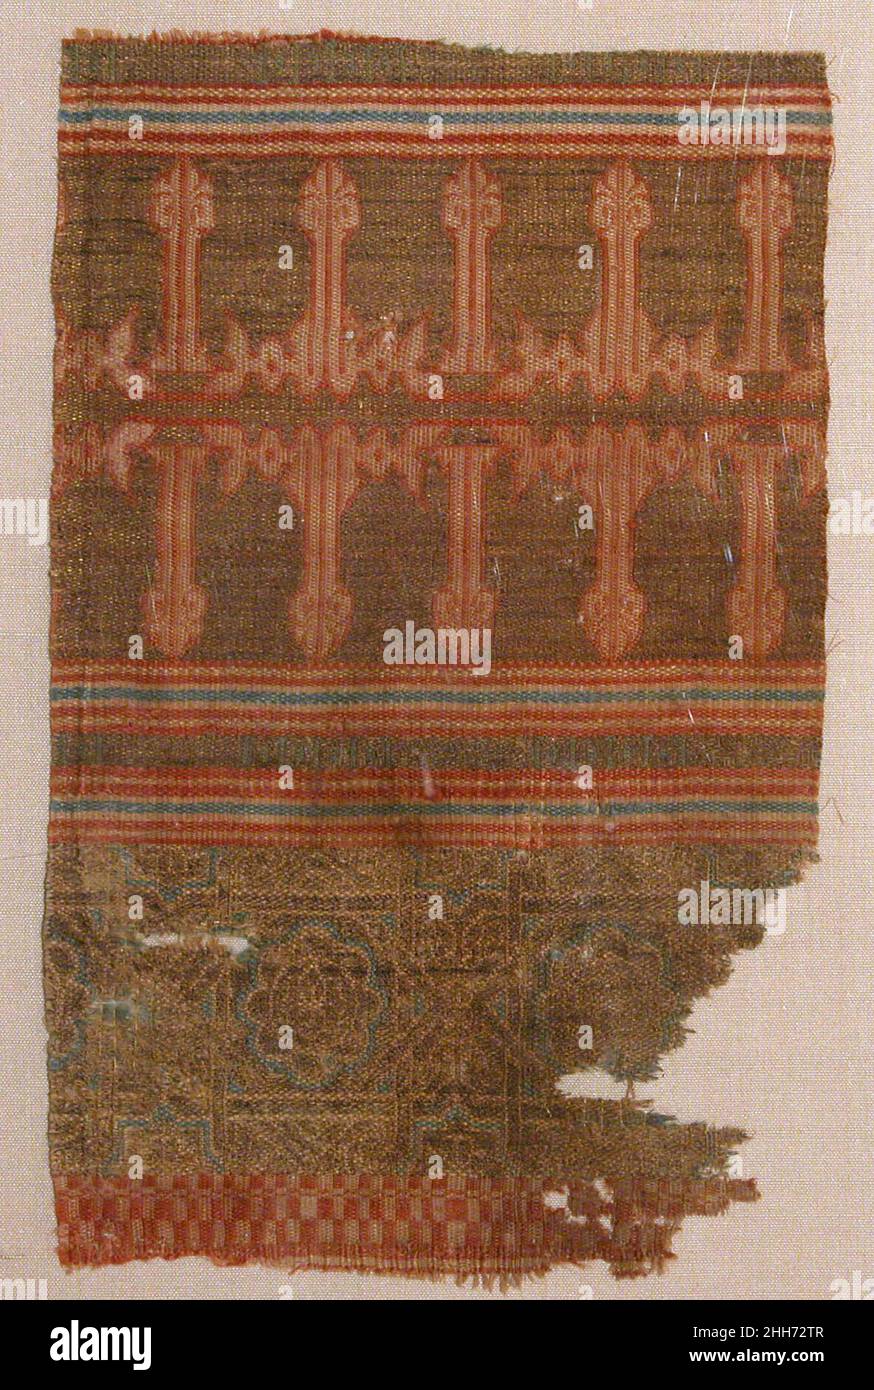 Textile Fragment from the Tomb of Don Felipe second half 13th century Part of a corpus of identical fragments, this Andalusian textile belonged to the mantle that was interred with Don Felipe Infante (d. 1274), son of Ferdinand II and brother of Alfonso X, thirteenth-century kings of Castile. The composition consists of registers containing repeating rosettes with geometric interlace against a gold background. The most prominent band features a kufic inscription, al-Yumn (felicity), in mirror image. Opulent textiles, probably manufactured in a Muslim production center, were regularly used for Stock Photo